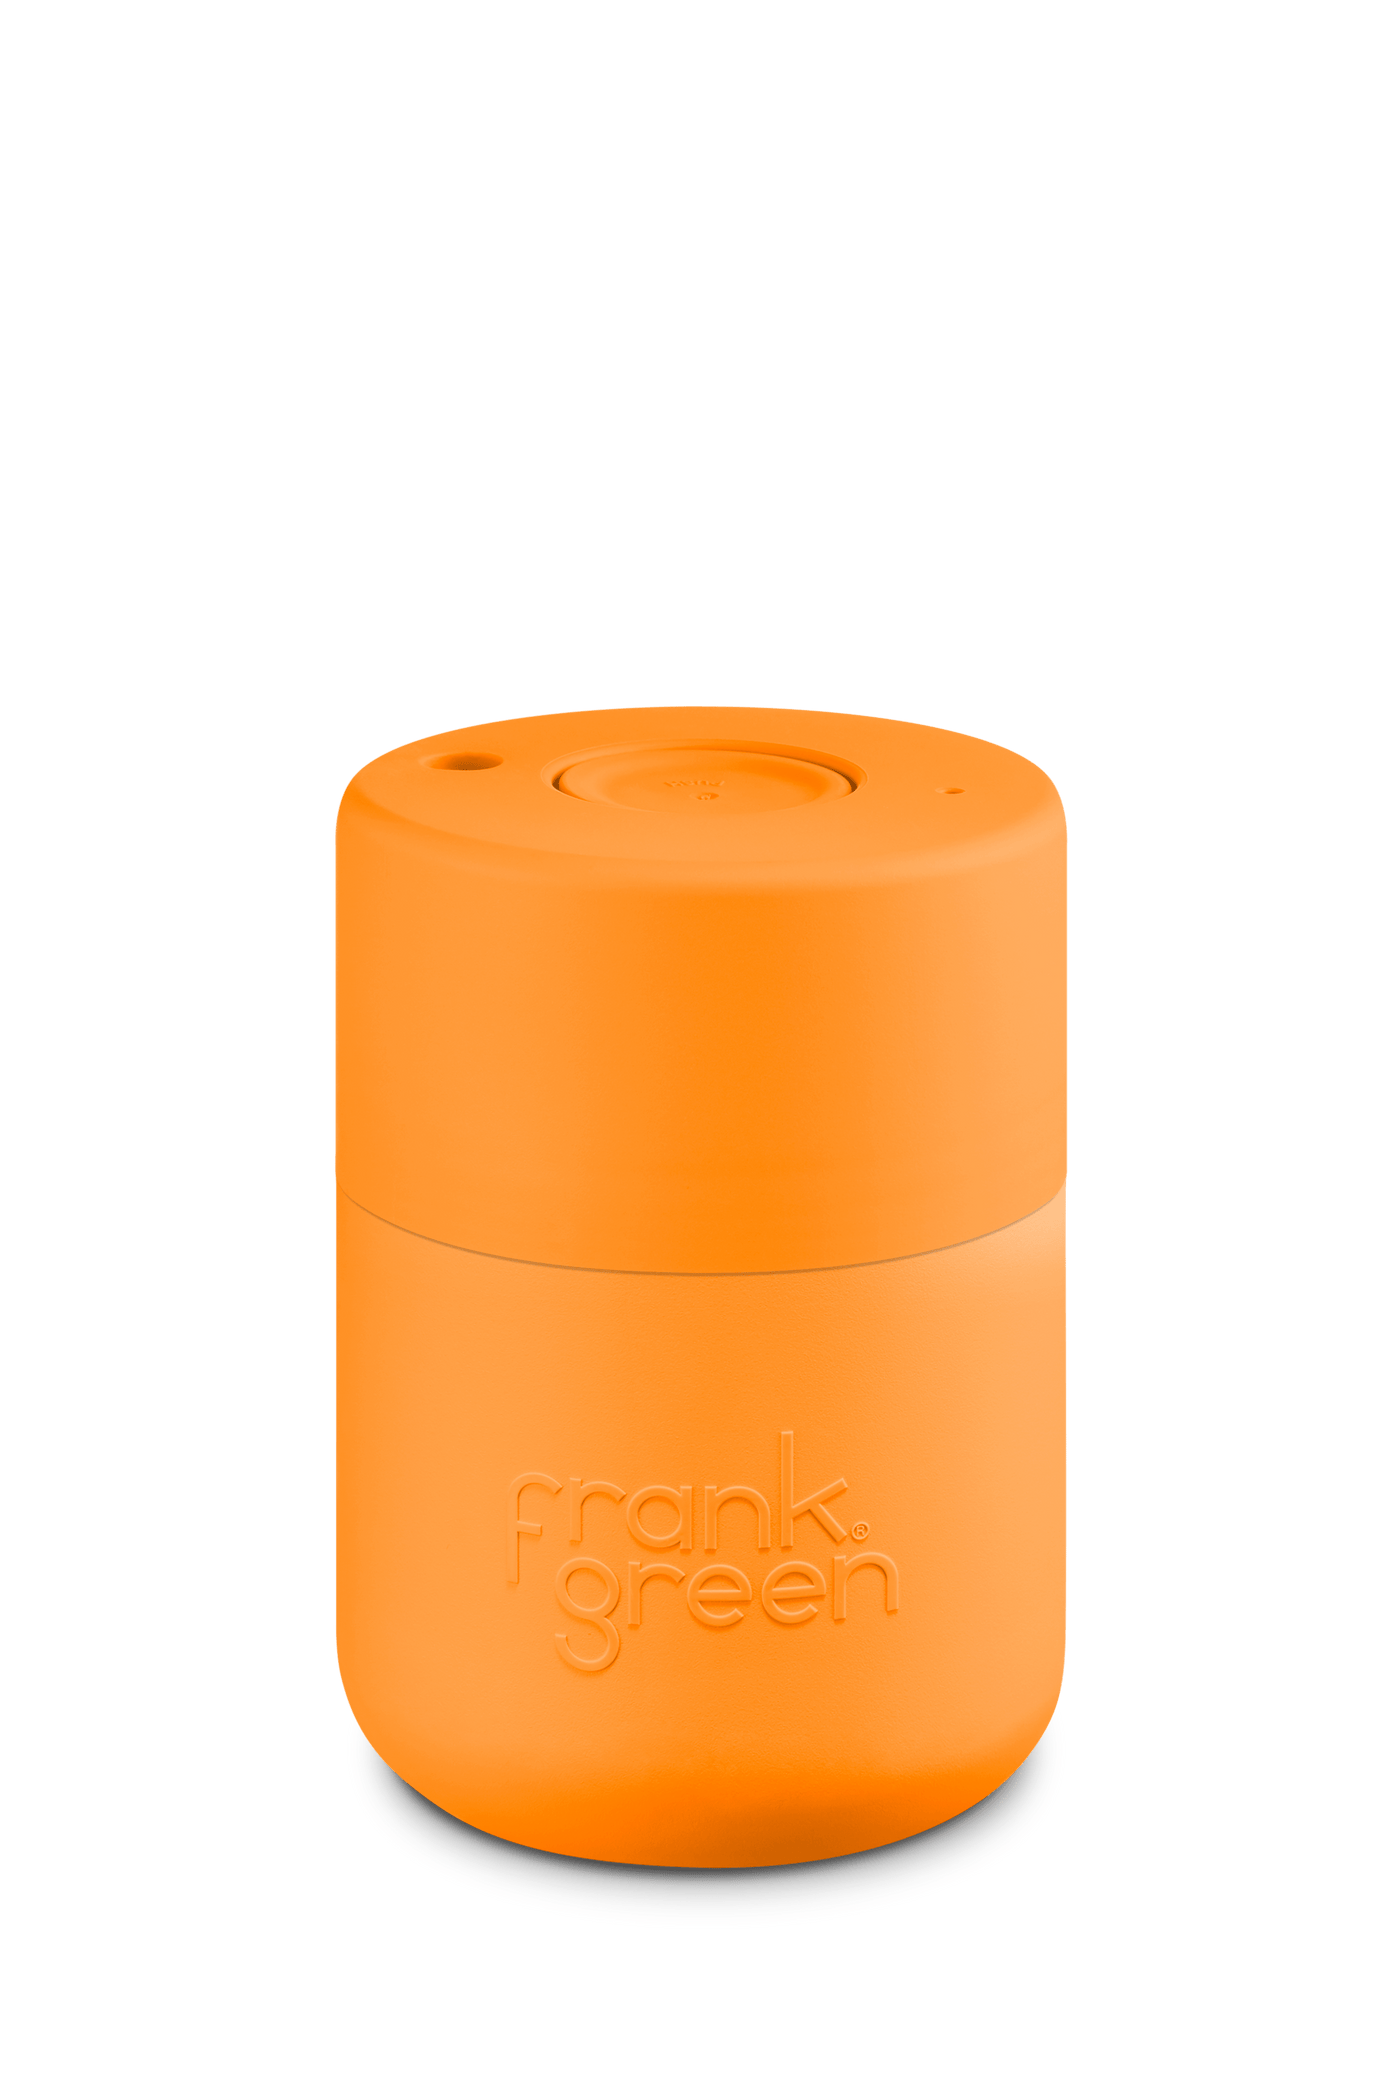 Frank Green KEEP CUP Tumeric 8oz Original Reusable Cup with Push Button Lid